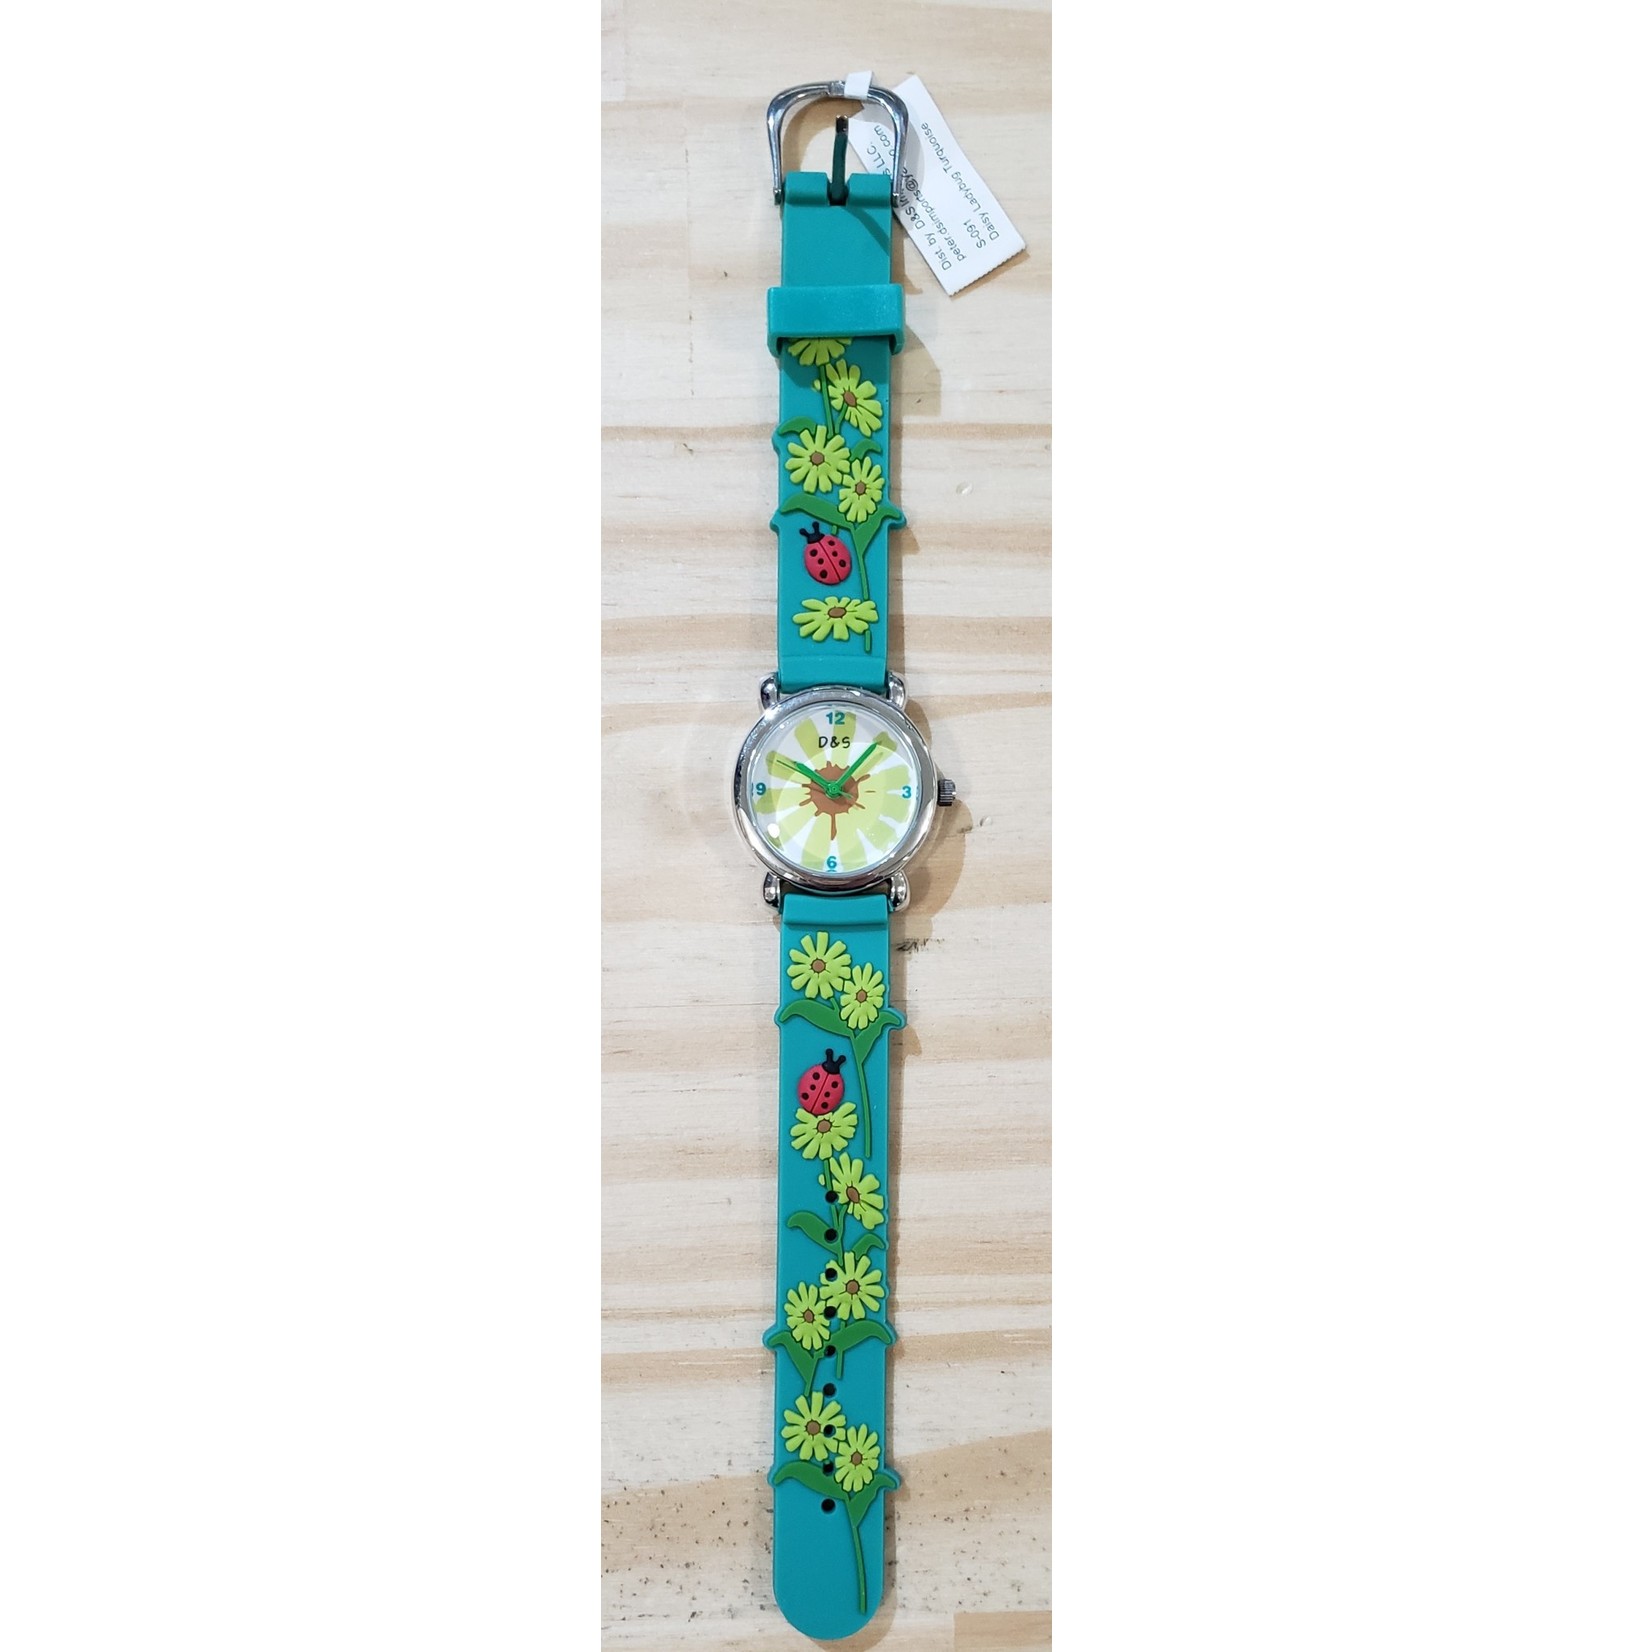 D&S Imports Watch - Sunflowers & Lady Bugs